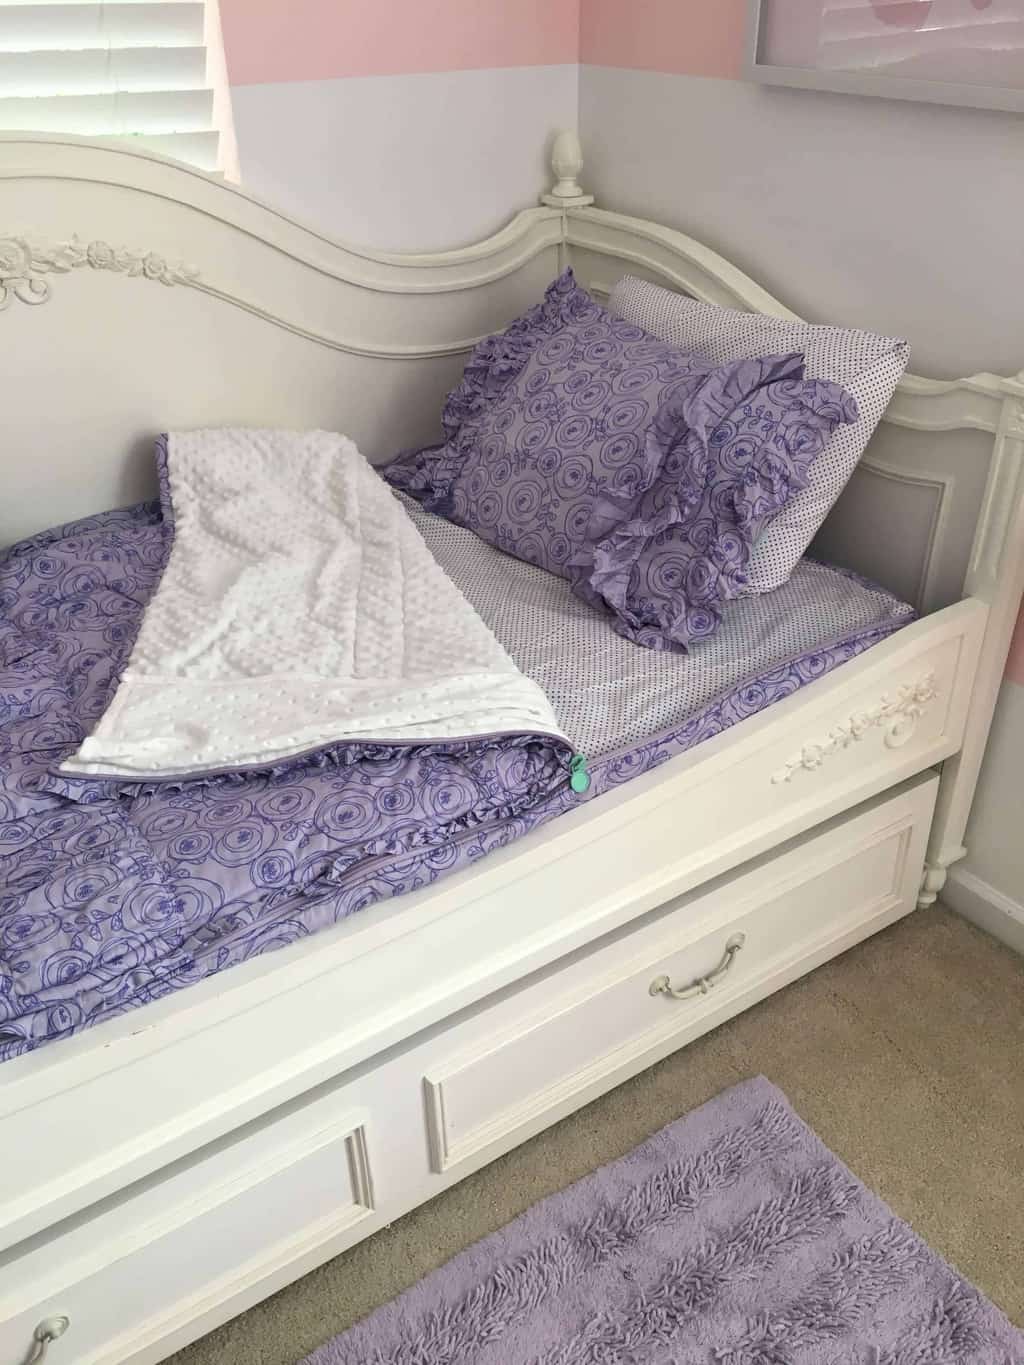 Clean house in one hour by letting your kids make their own beds!